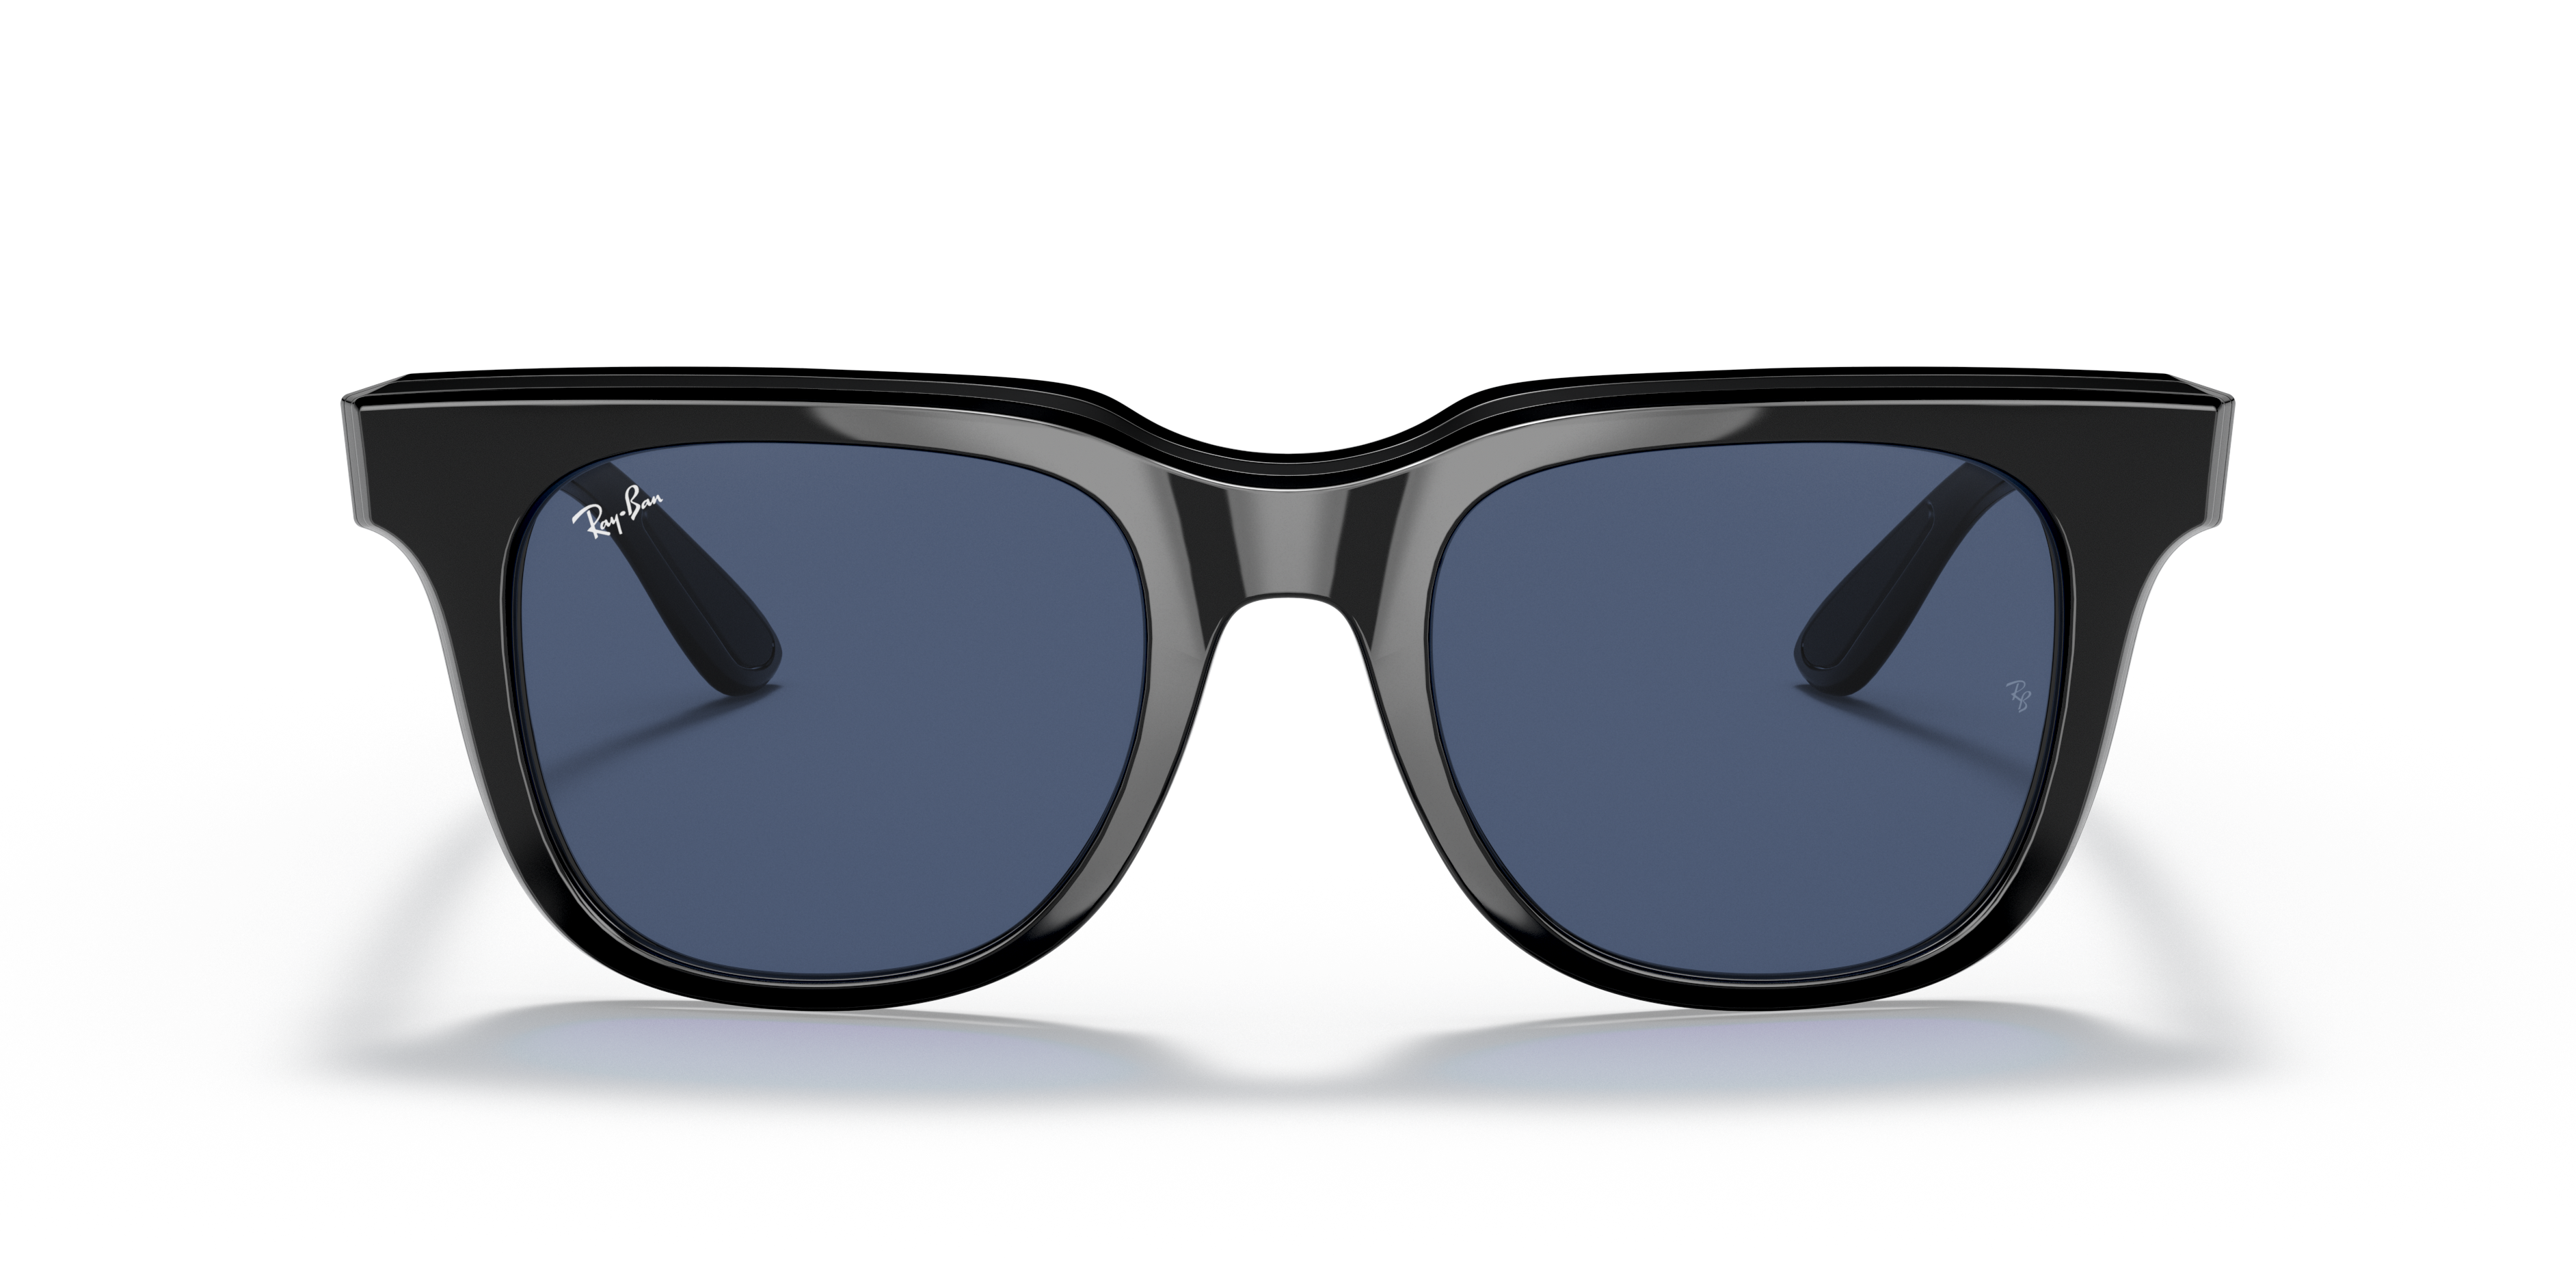 Rb4368 Sunglasses in Black and Dark Blue | Ray-Ban®